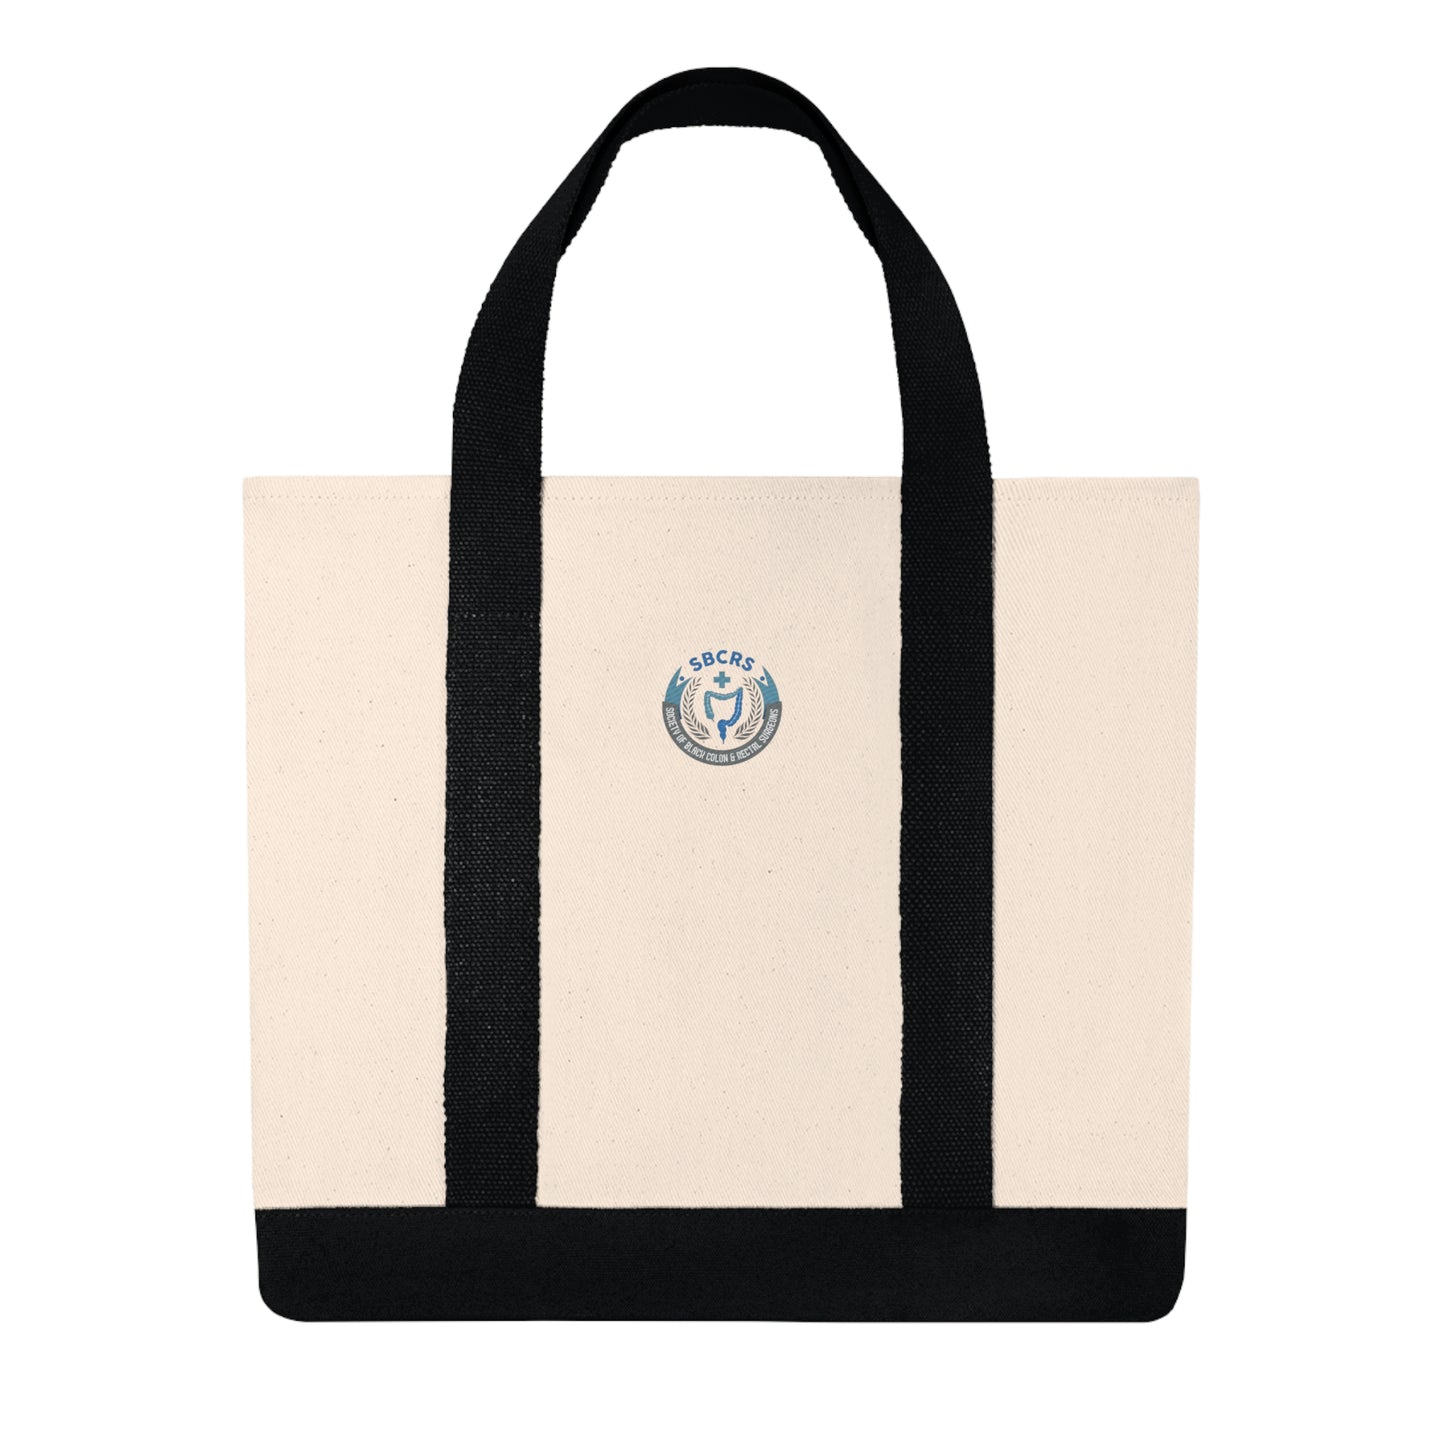 SBCRS Embroidered Shopping Tote